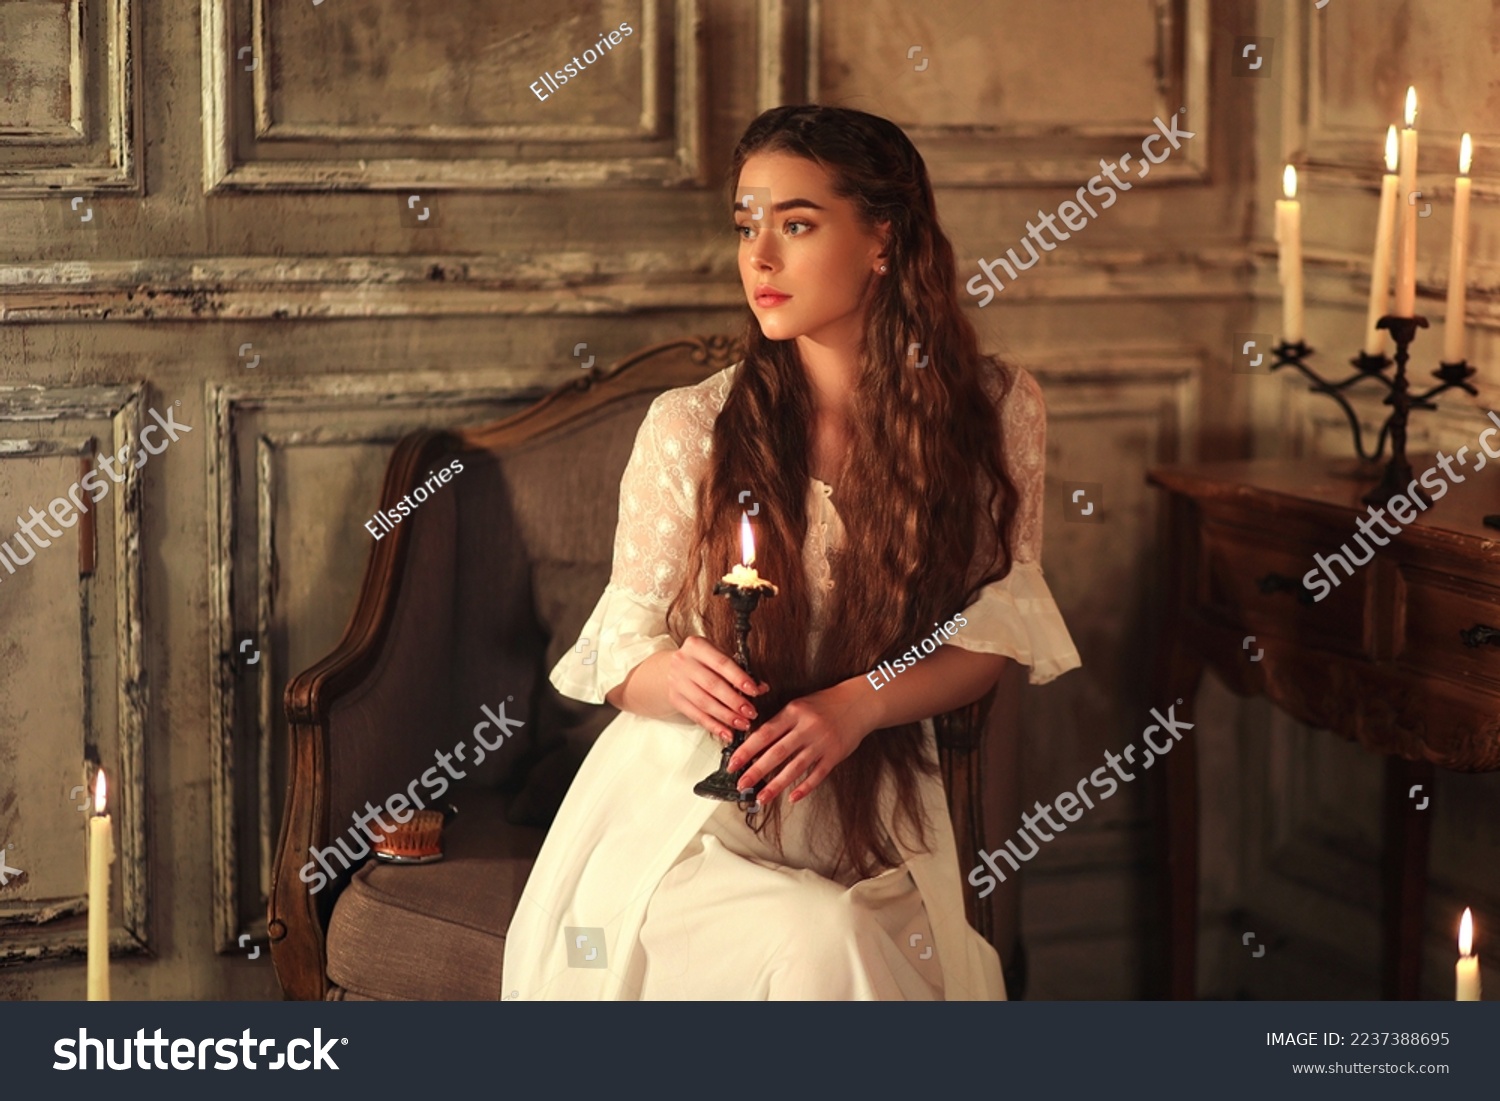 Young long haired woman in vintage night gown sitting on chair with candle in hands. Historic portrait of noble woman #2237388695